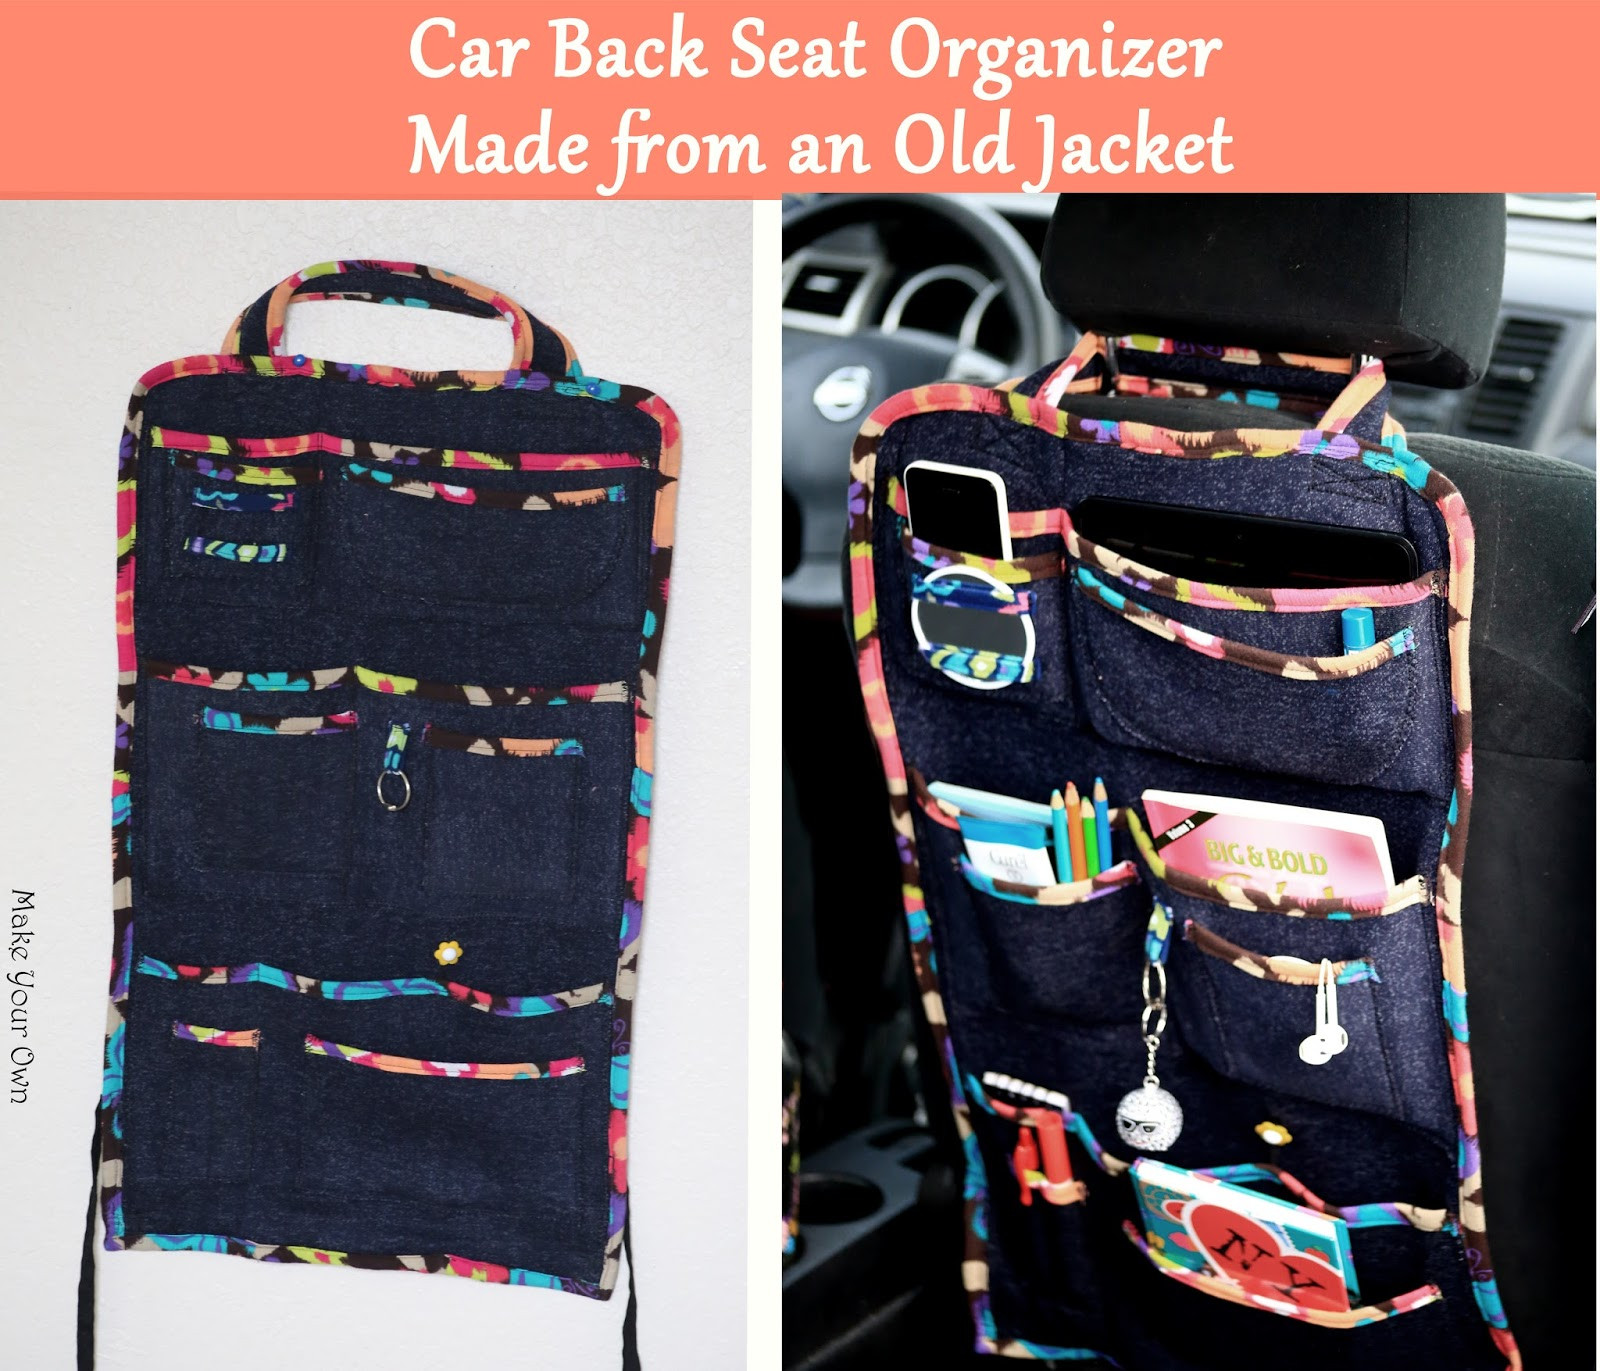 DIY Car Organizer
 Make Your Own Car Back Seat Organizer Made from an Old Jacket